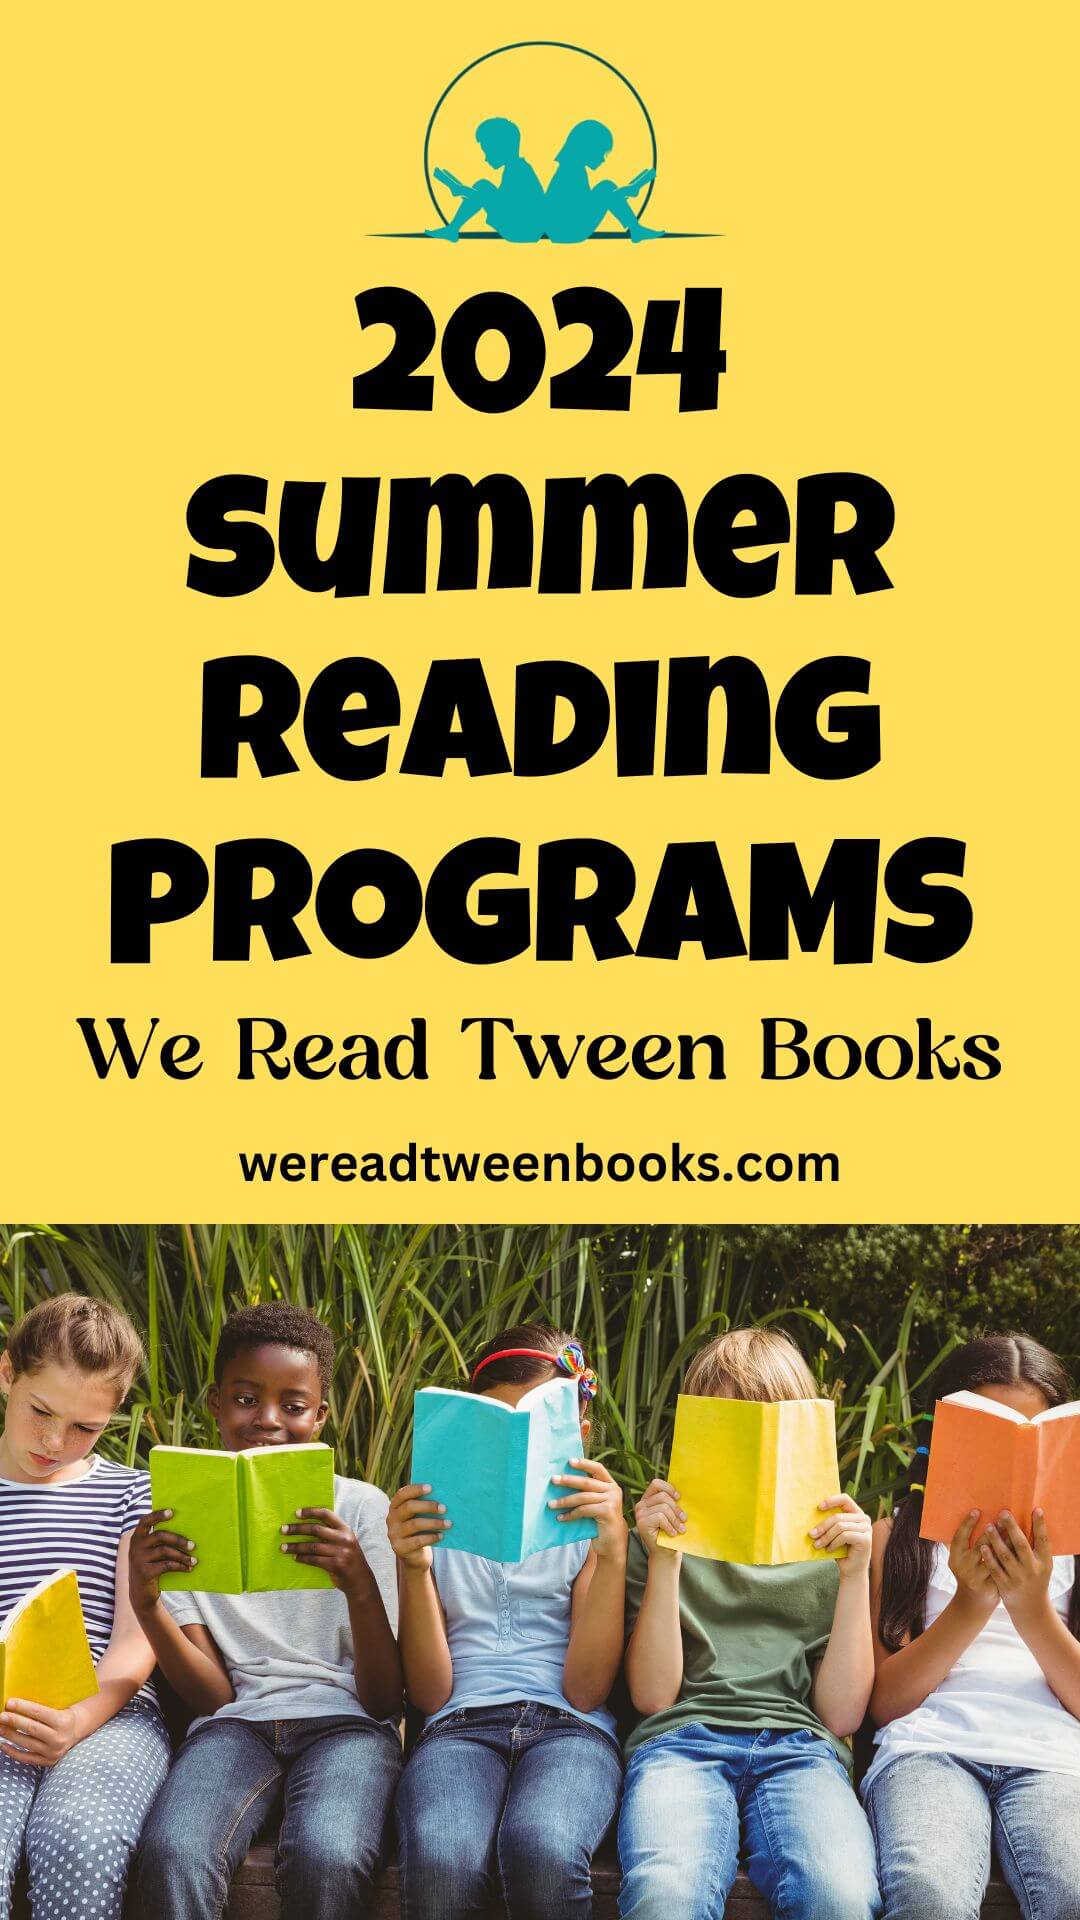 Check out the best summer reading programs for kids and tweens for 2024 in this list from We Read Tween Books.